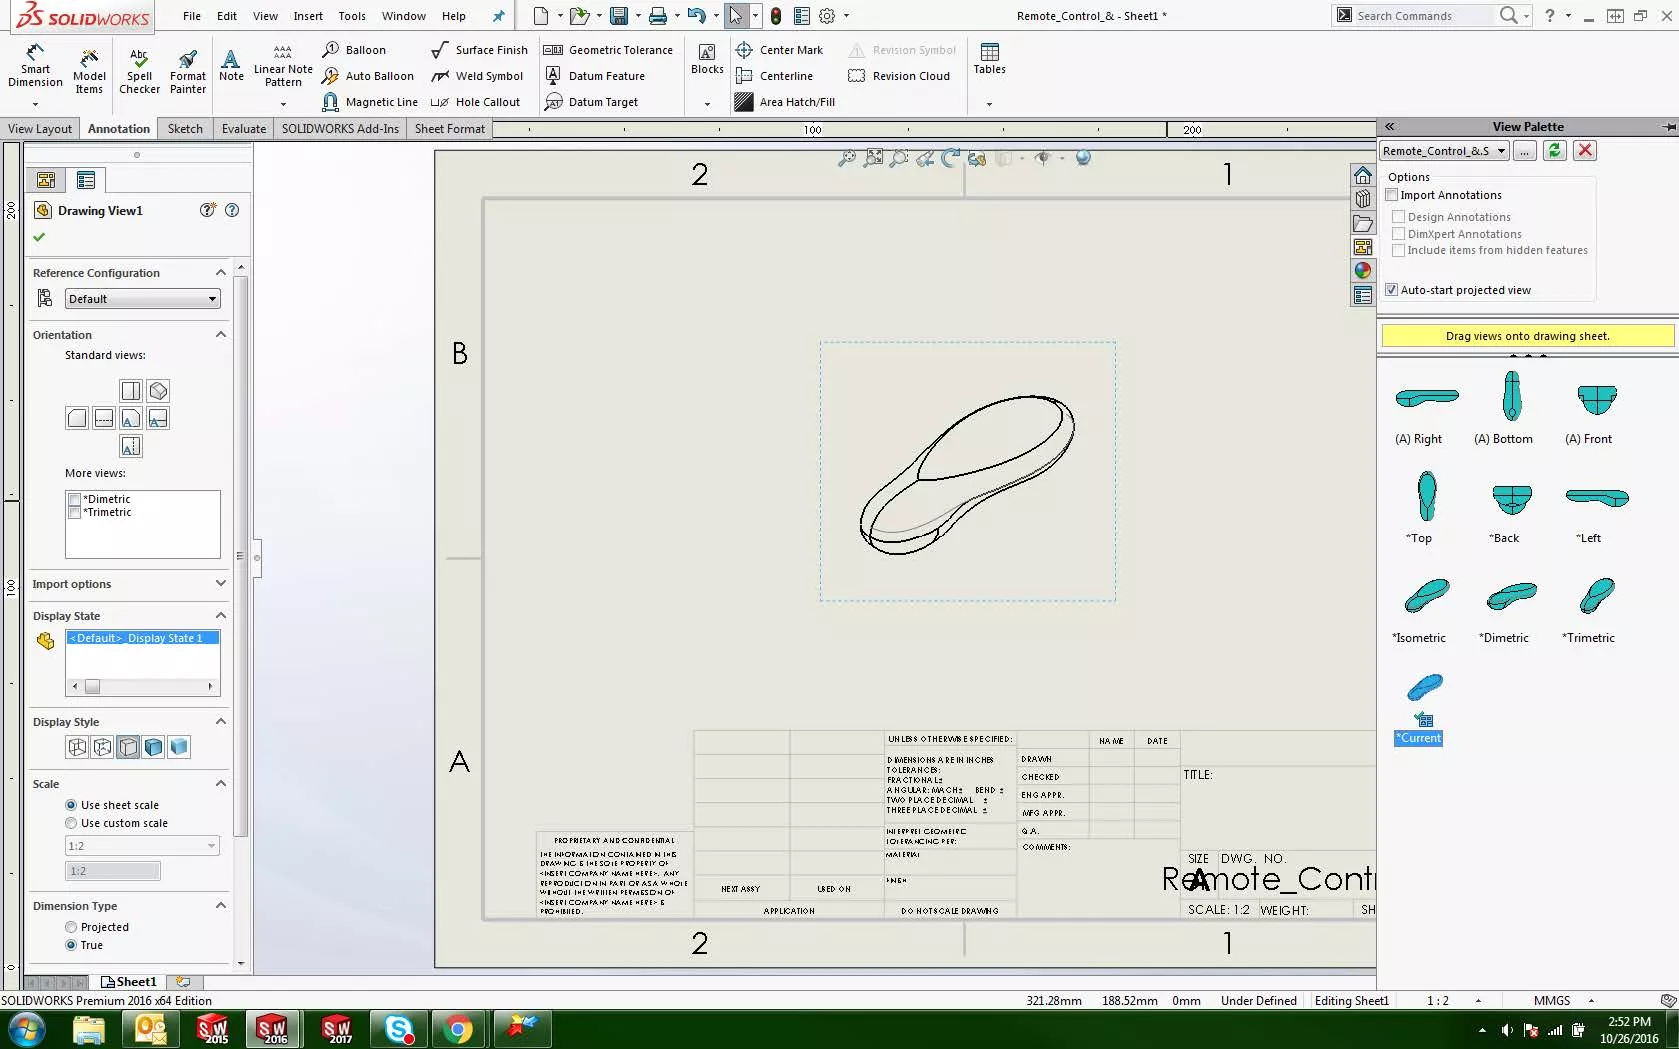 SOLIDWORKS Drawing View Palette